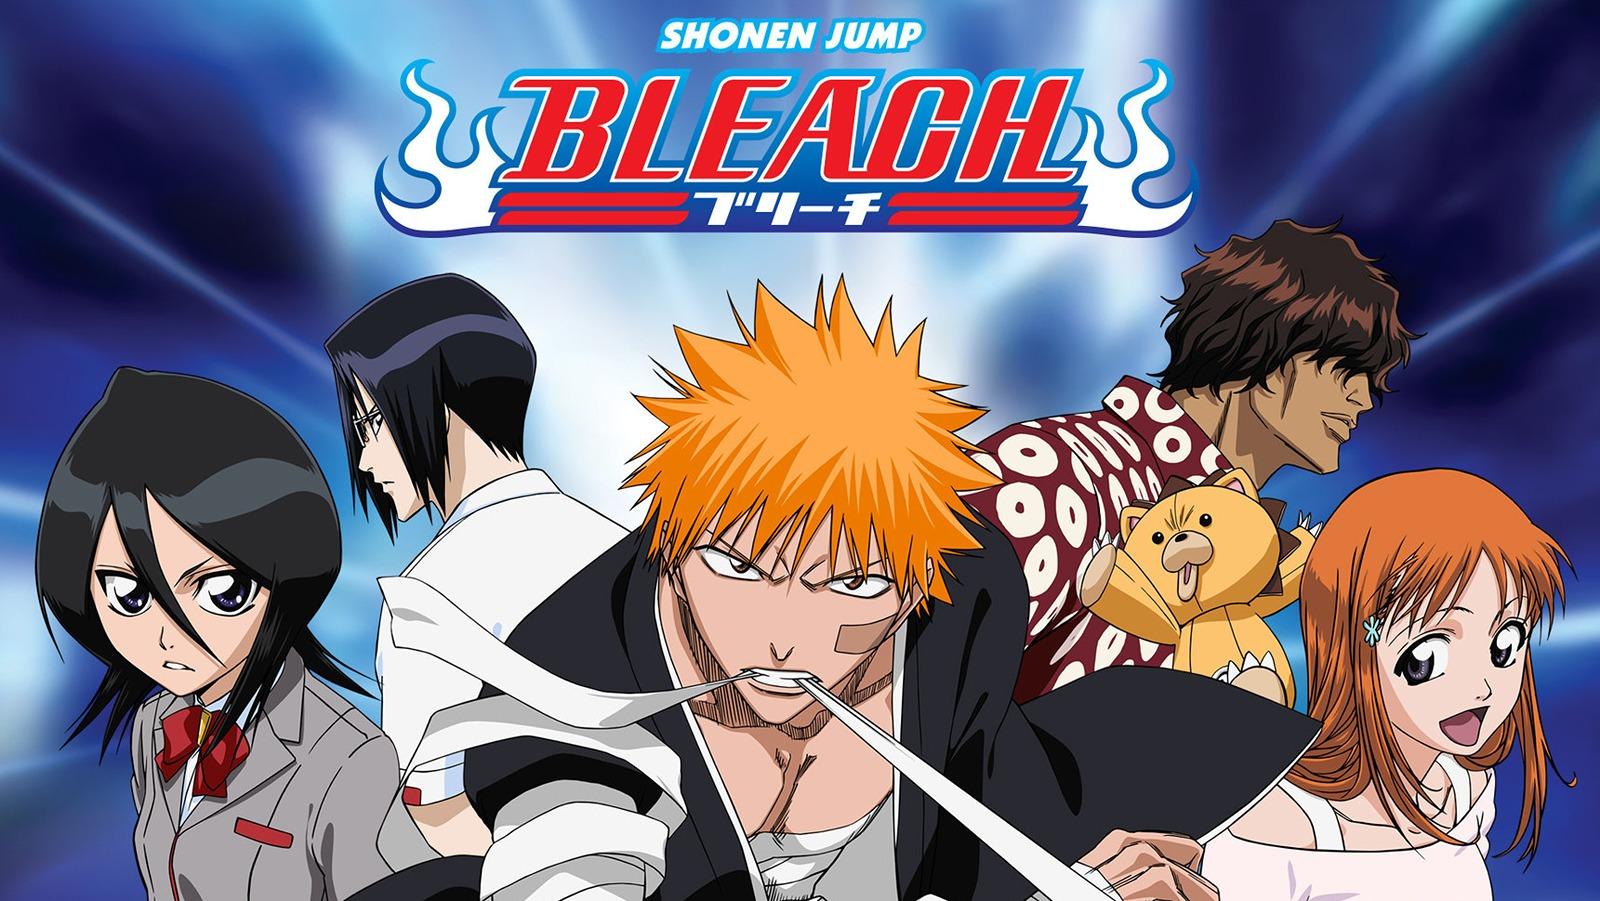 Where can I watch Bleach now that it's not on Crunchyroll and